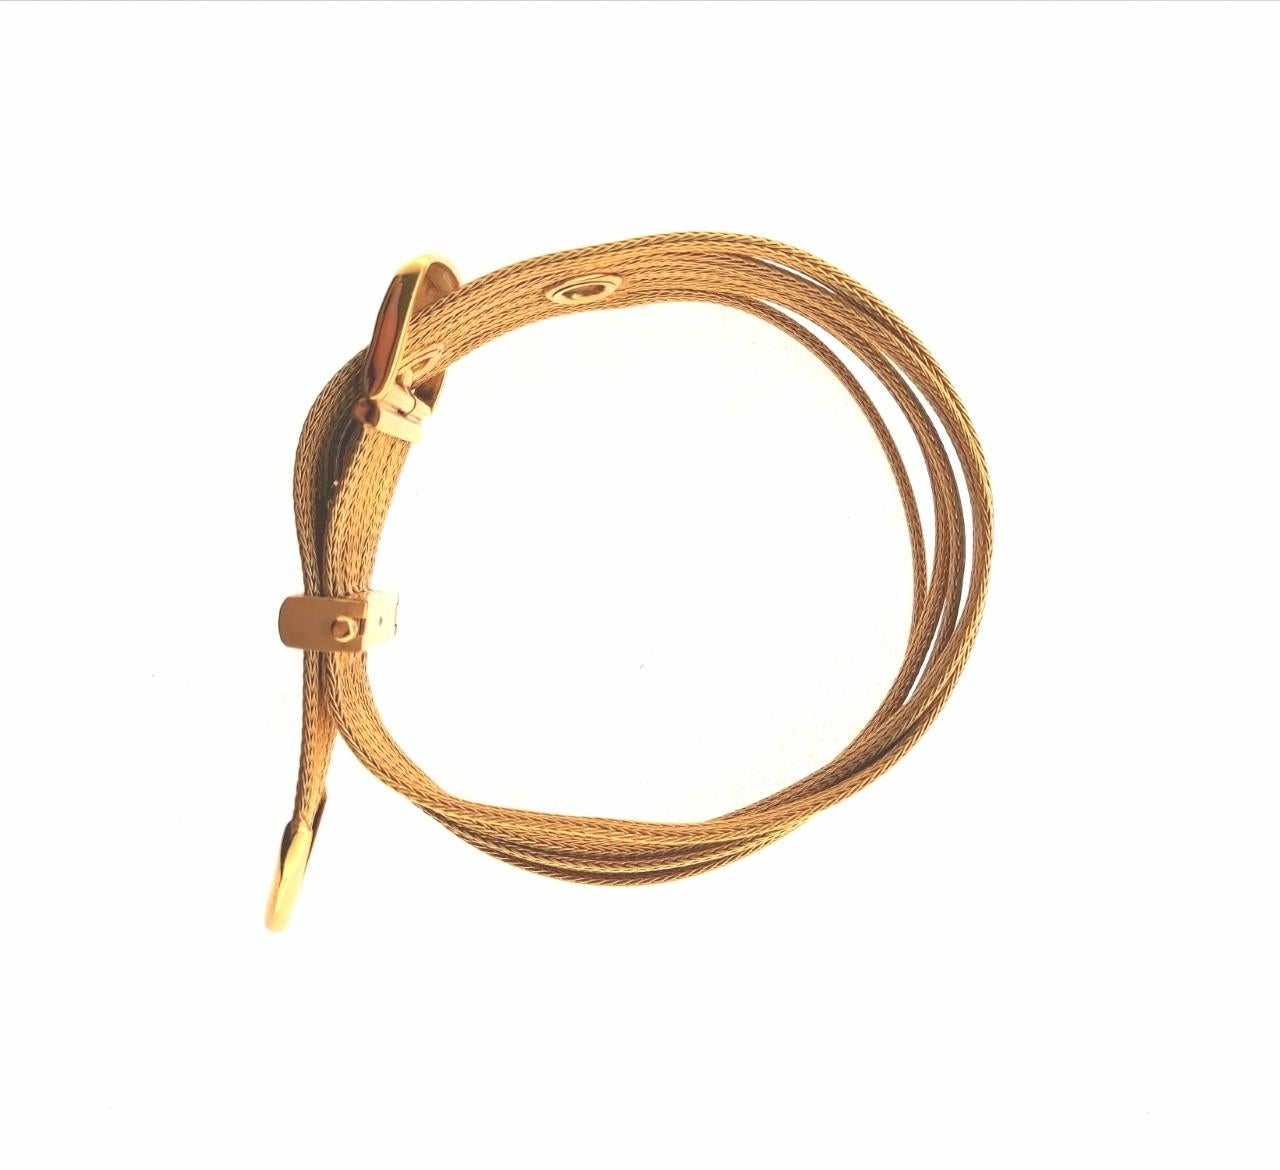 Classy and modern 18 Karats pink gold belt shaped bracelet. It has an extraordinarily made gold mesh with a very soft touch. Very attractive not only because of the belt-shaped design, but also for the pink gold. Adjustable to different